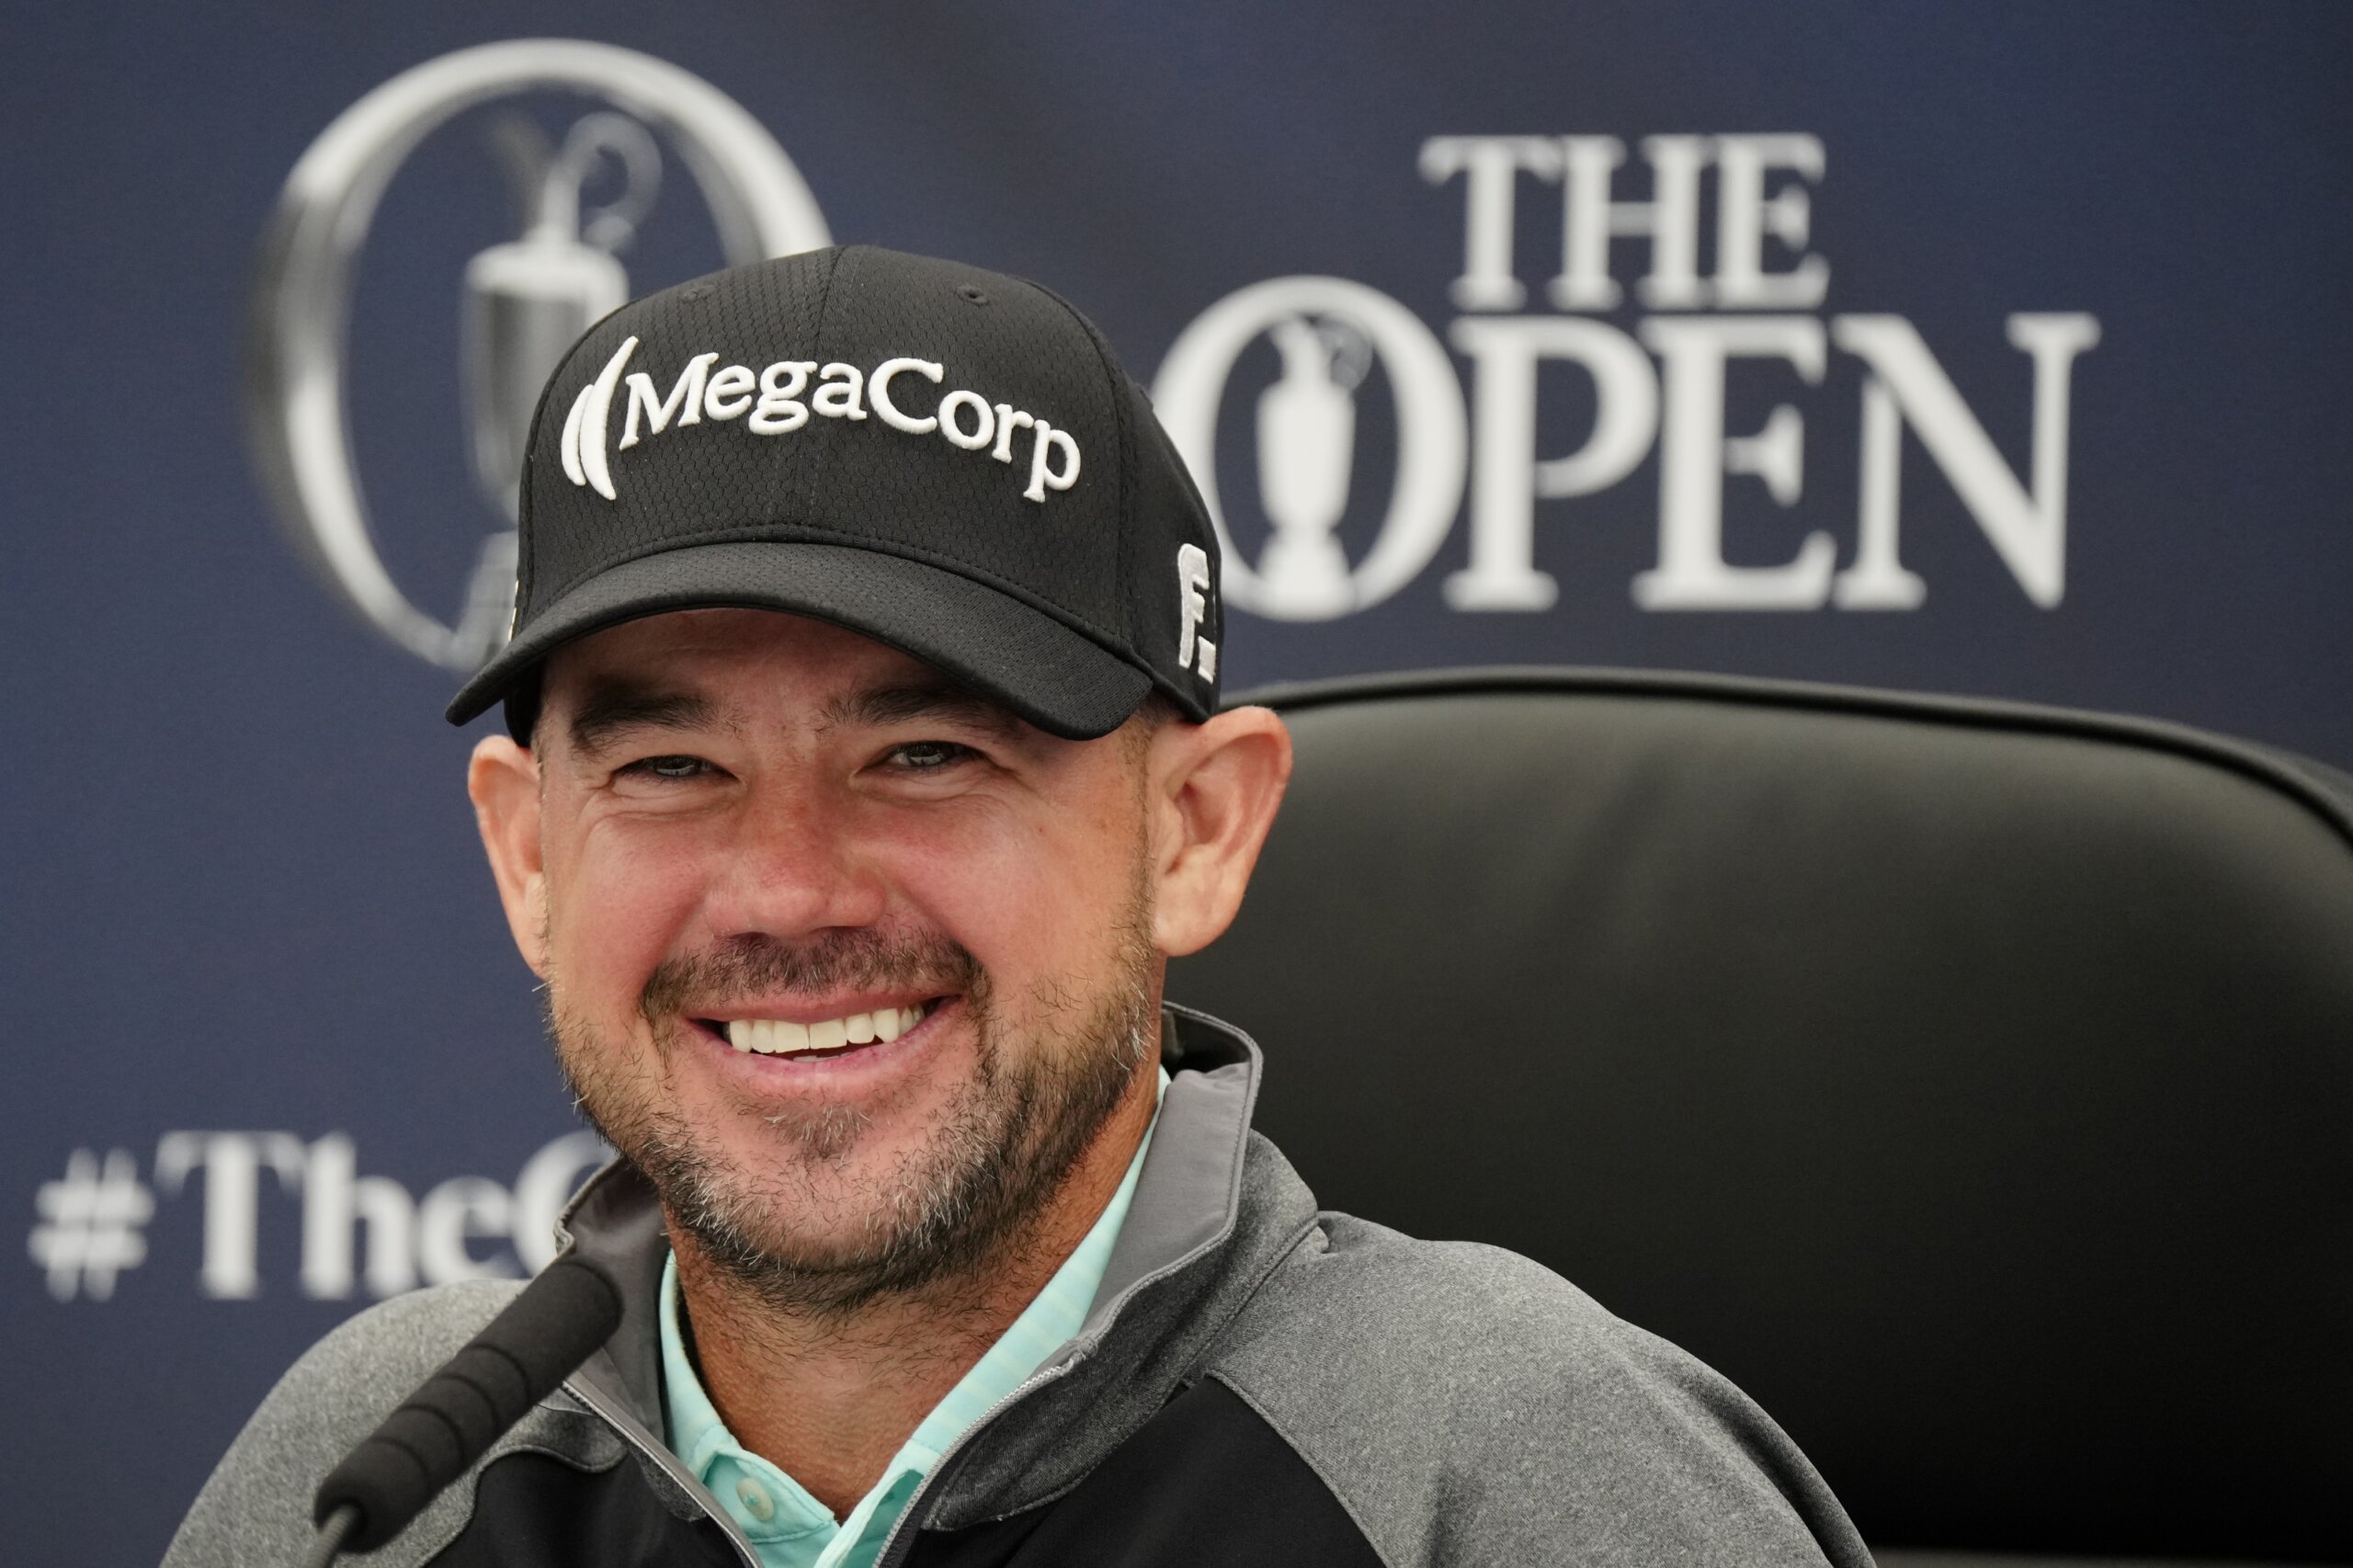 Brian Harman matches British Open records at Hoylake and leads Tommy